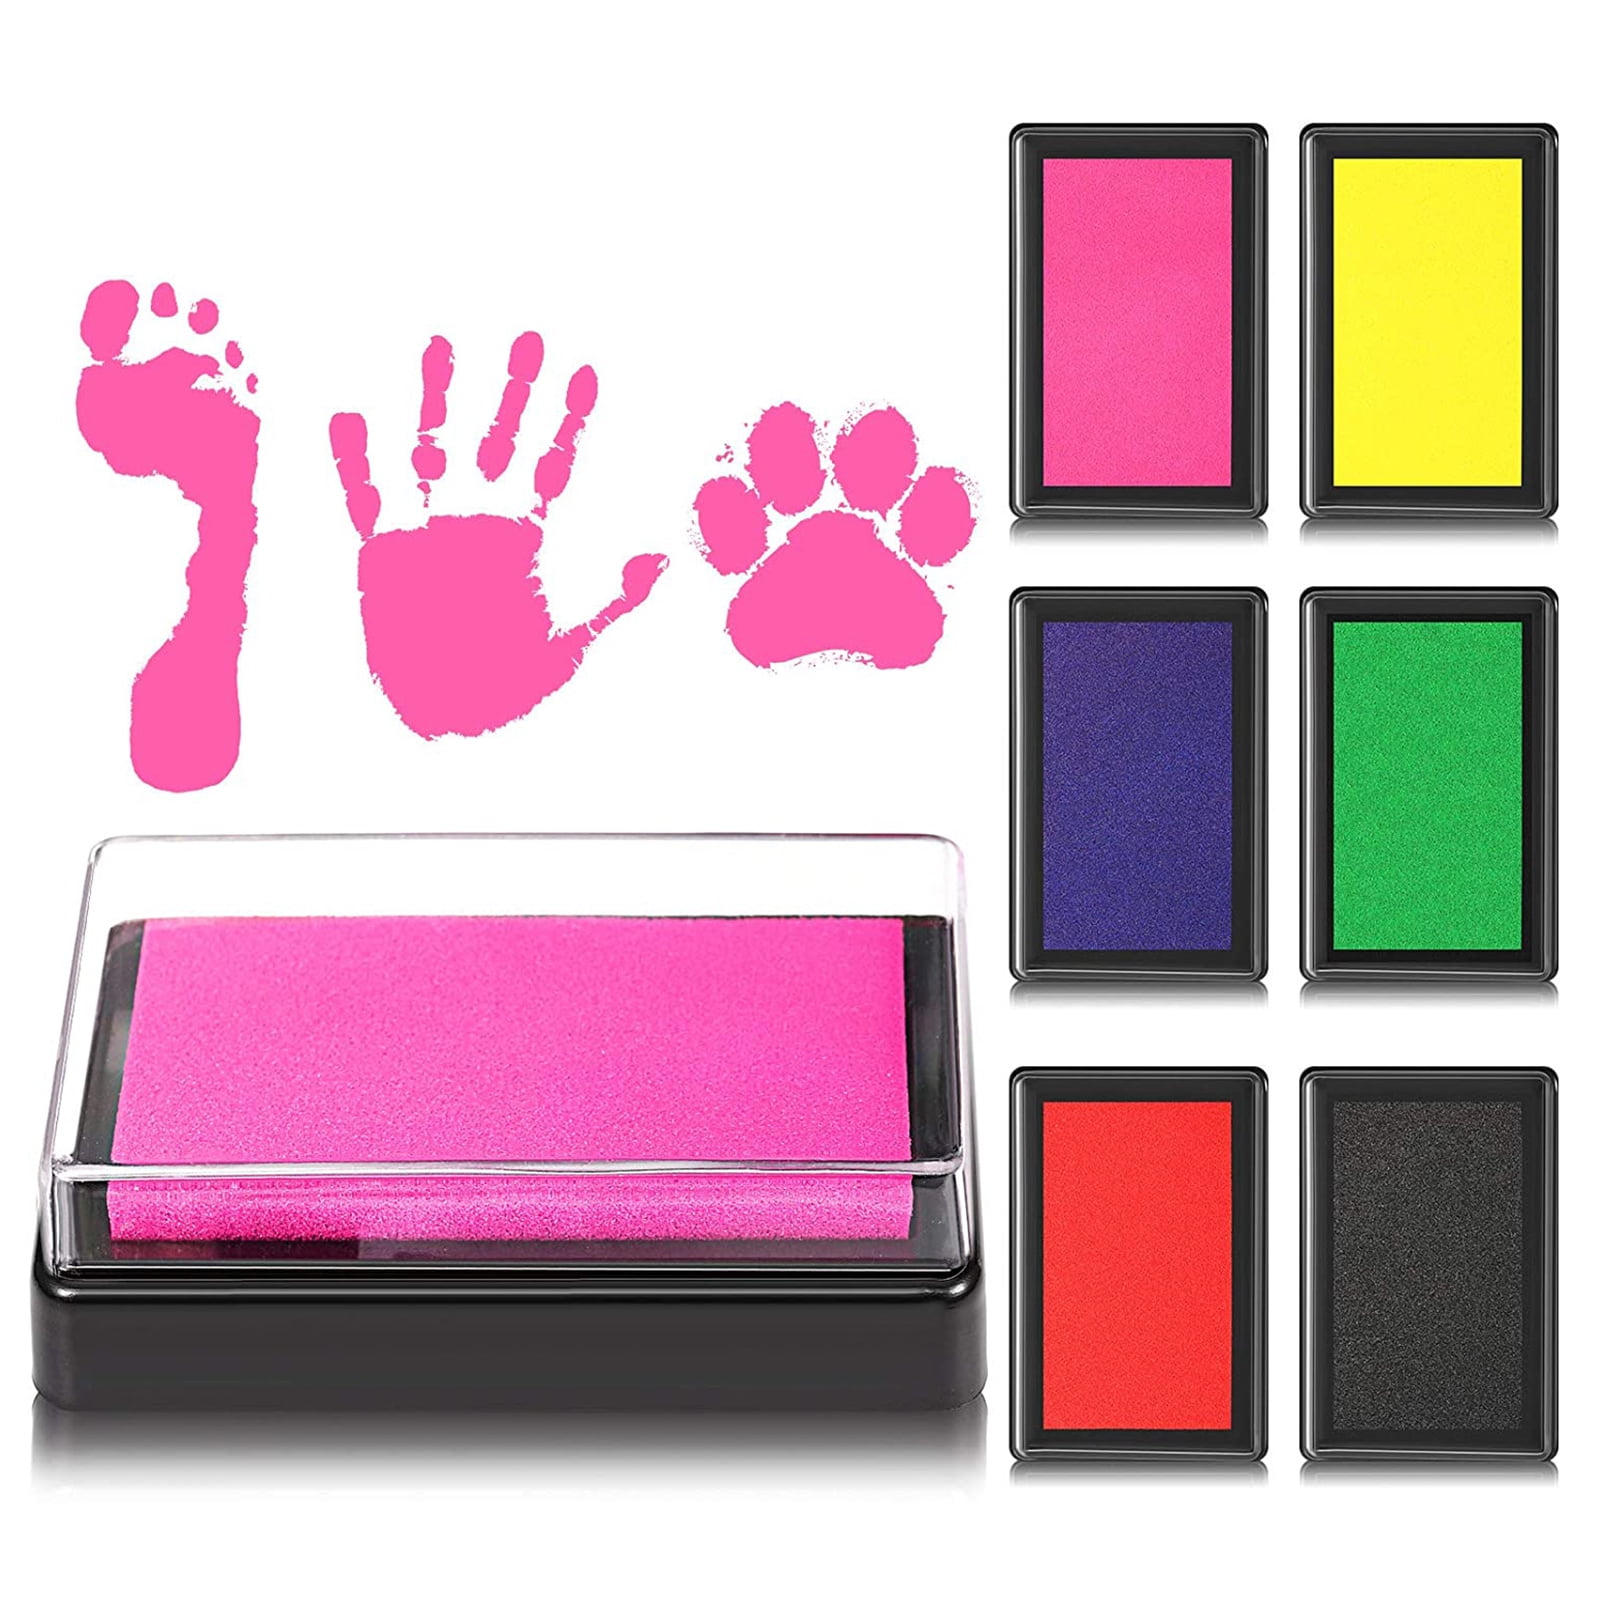 6 Washable Ink Pads (8 different colors) - baby & kid stuff - by owner -  household sale - craigslist